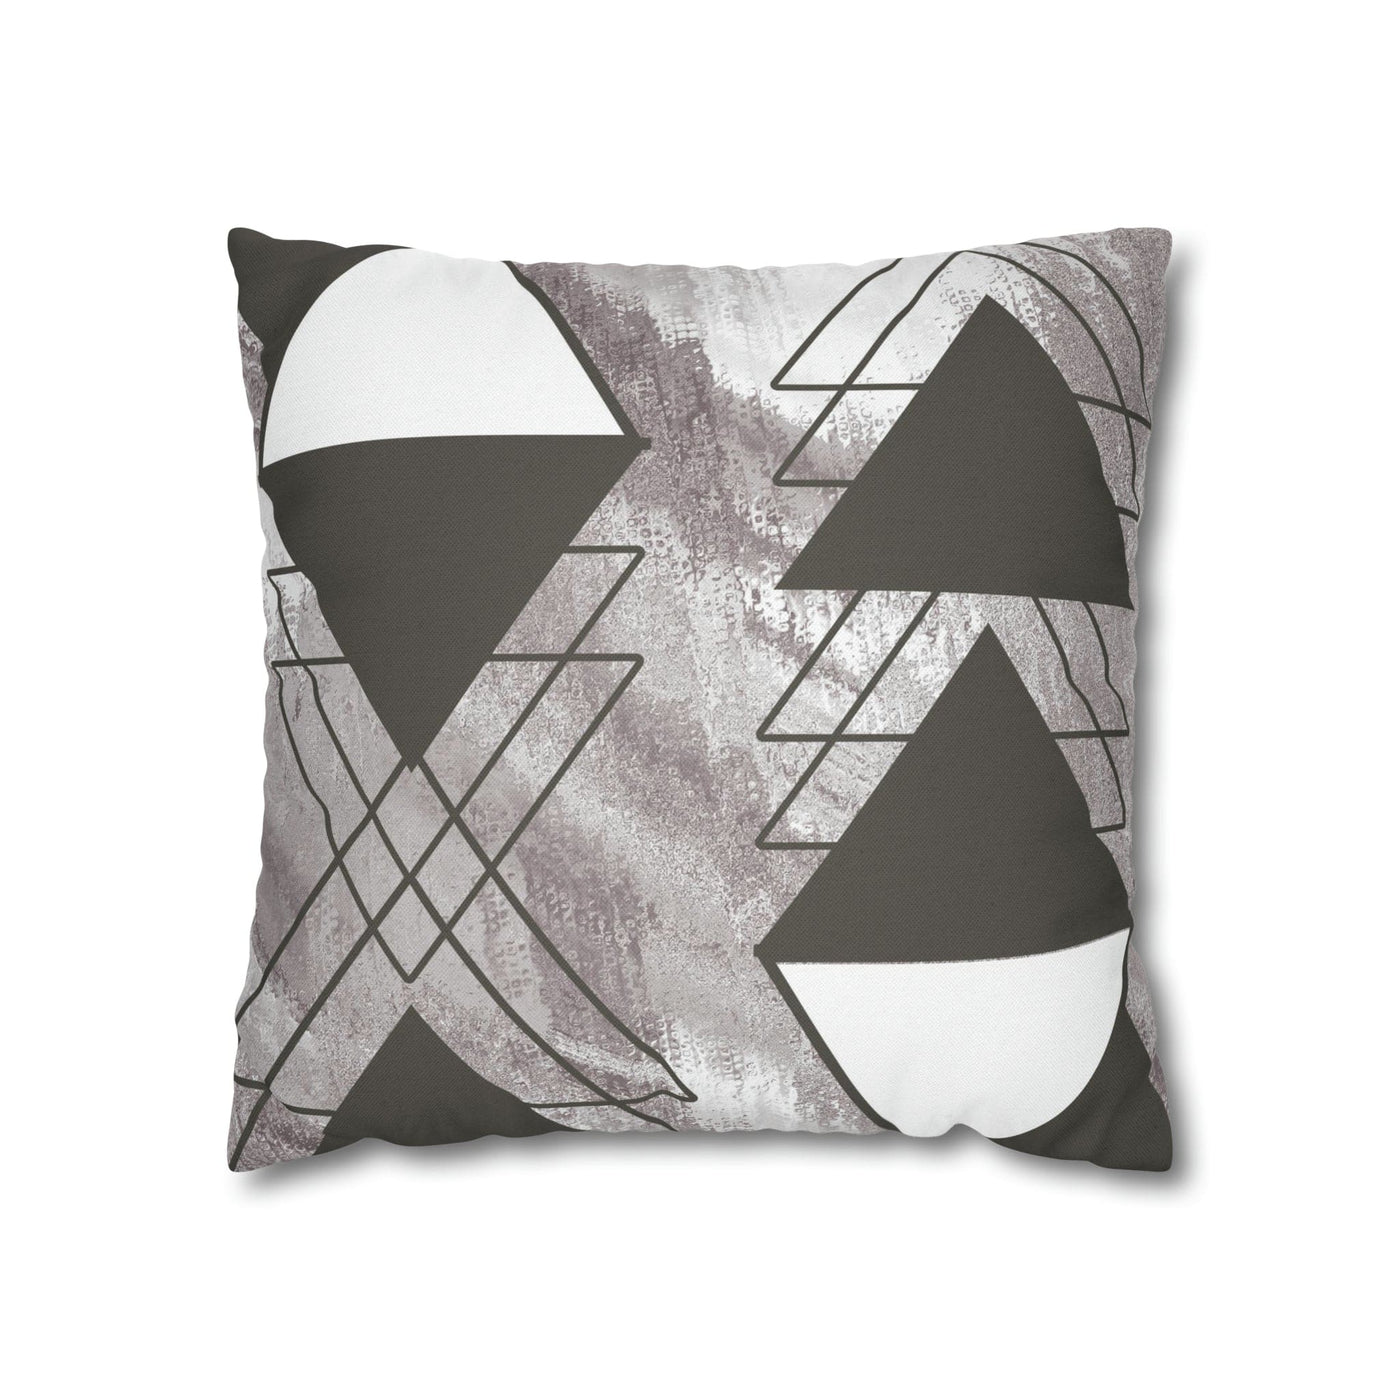 Decorative Throw Pillow Covers With Zipper - Set Of 2 Ash Grey And White